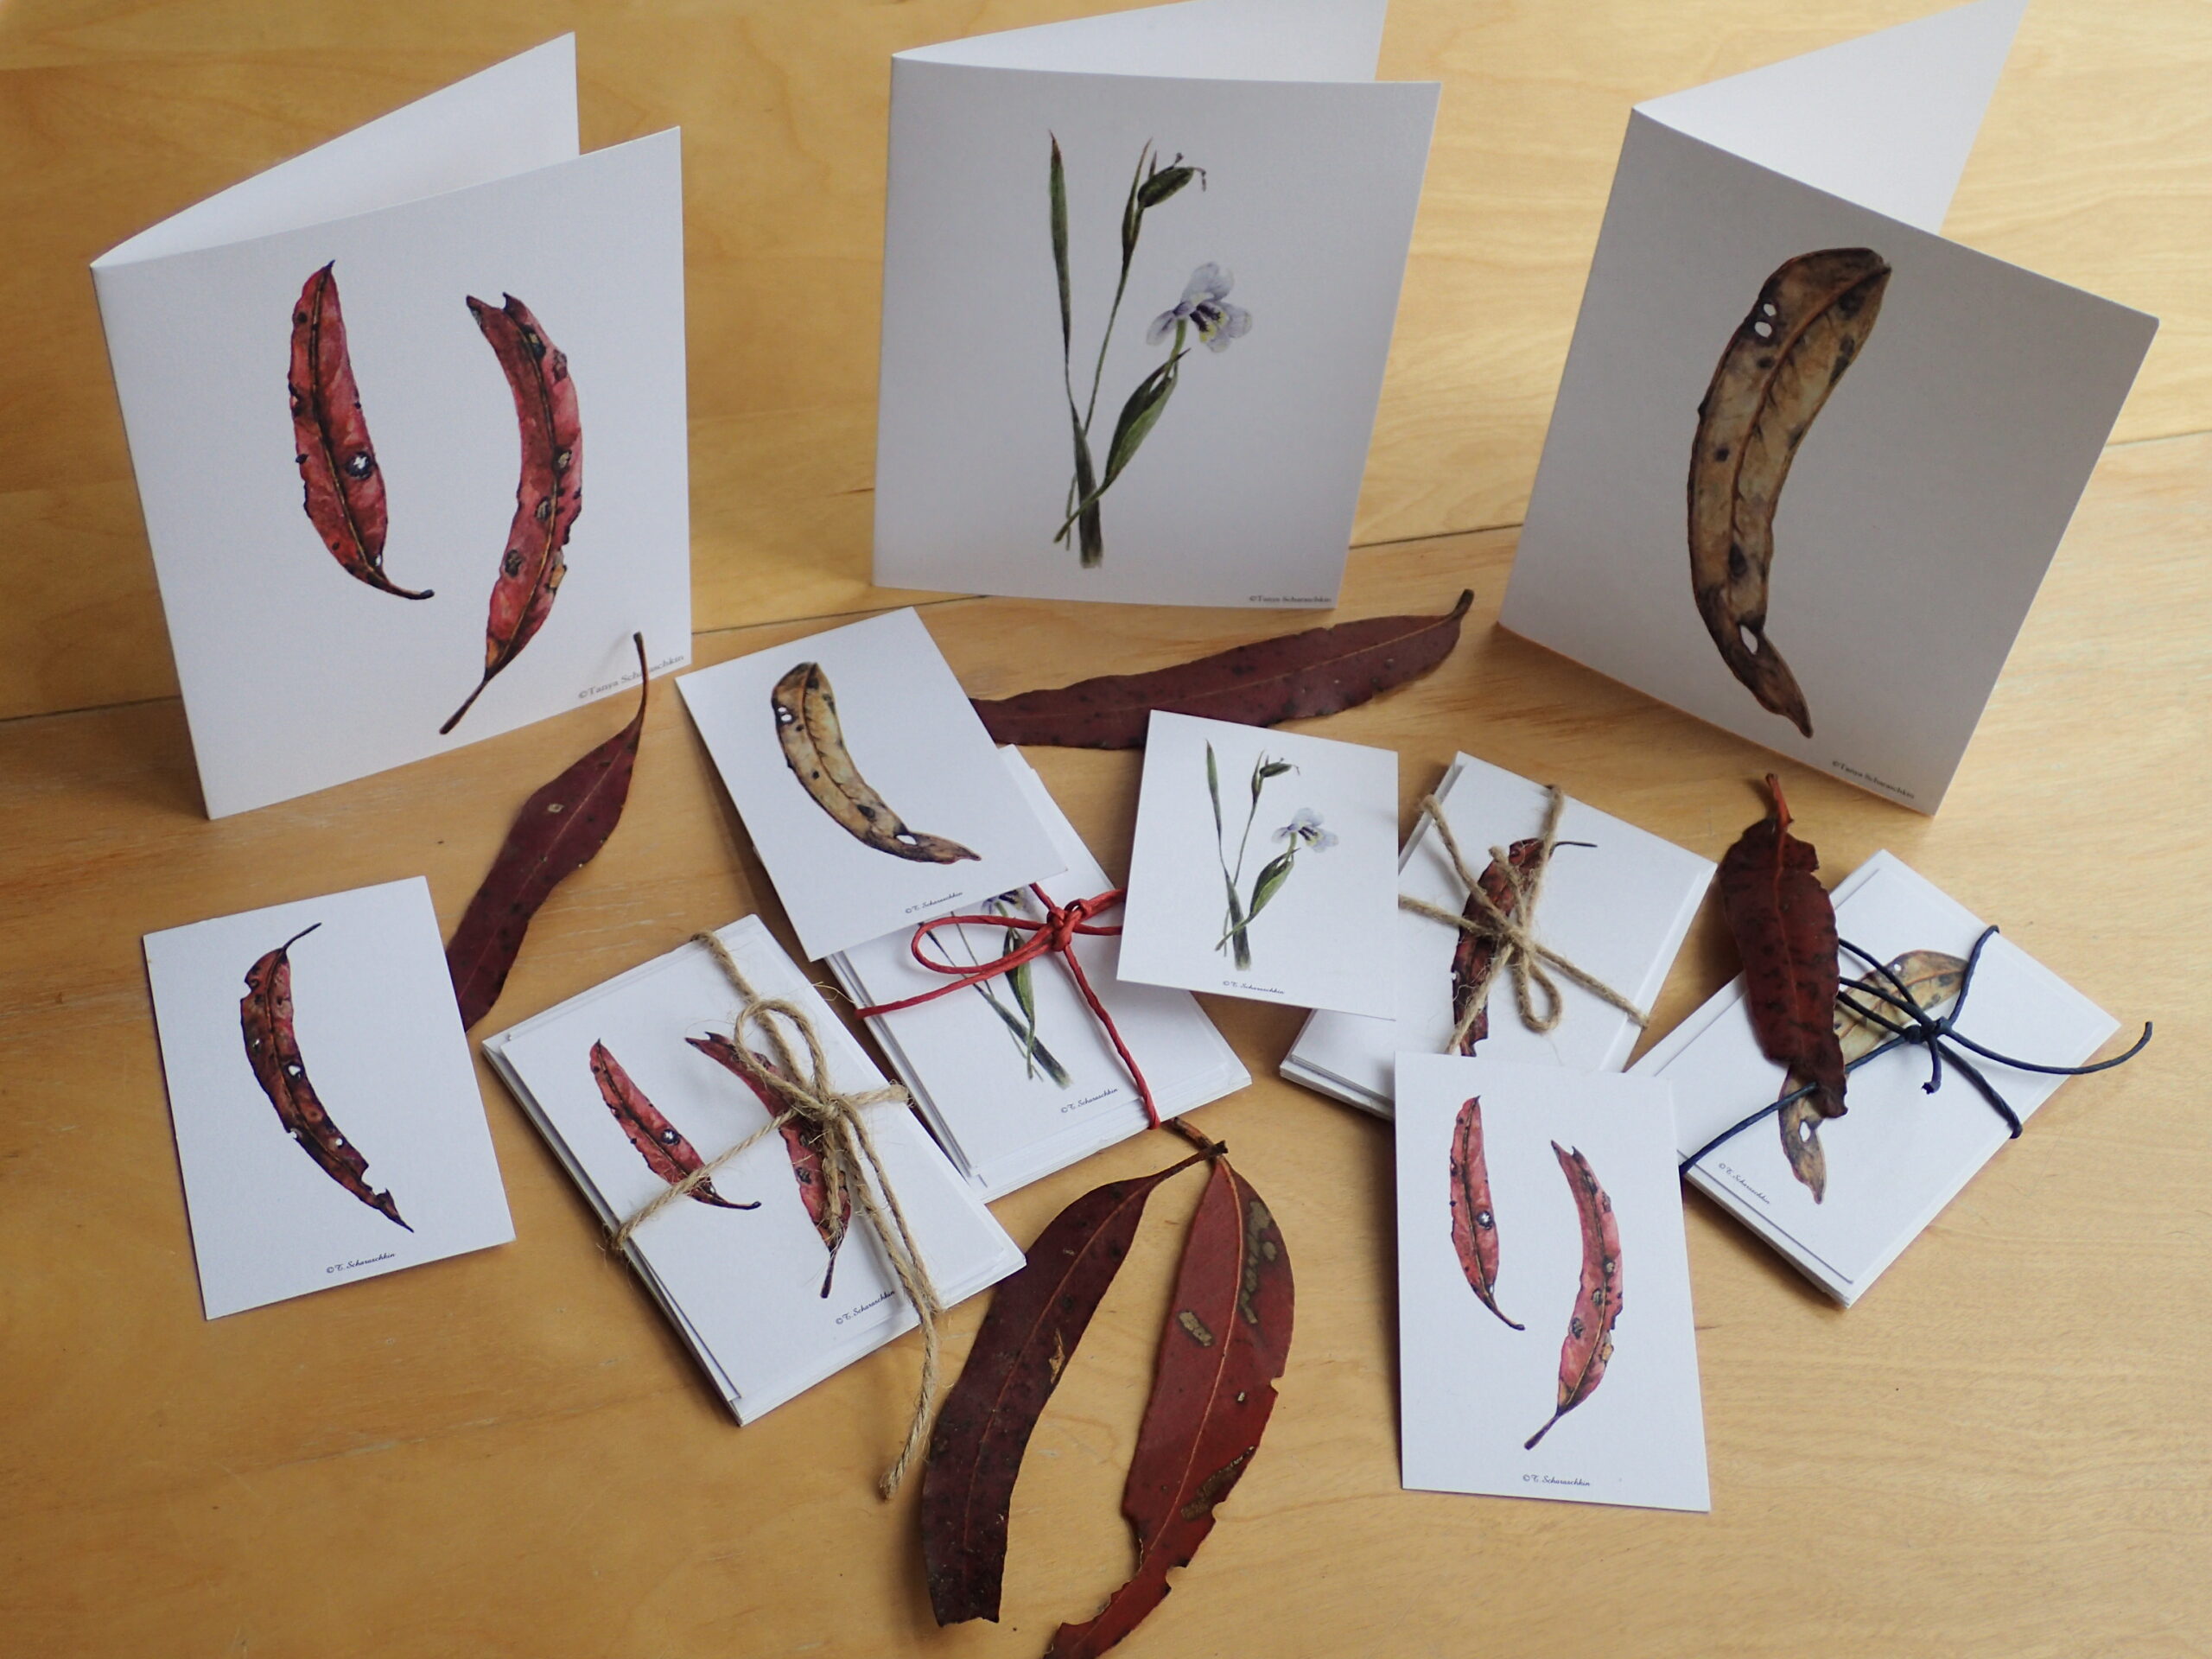 Gum leaf paintings on greeting cards by Tanya Scharaschkin in her Artist Profile with Art Trails Tasmania